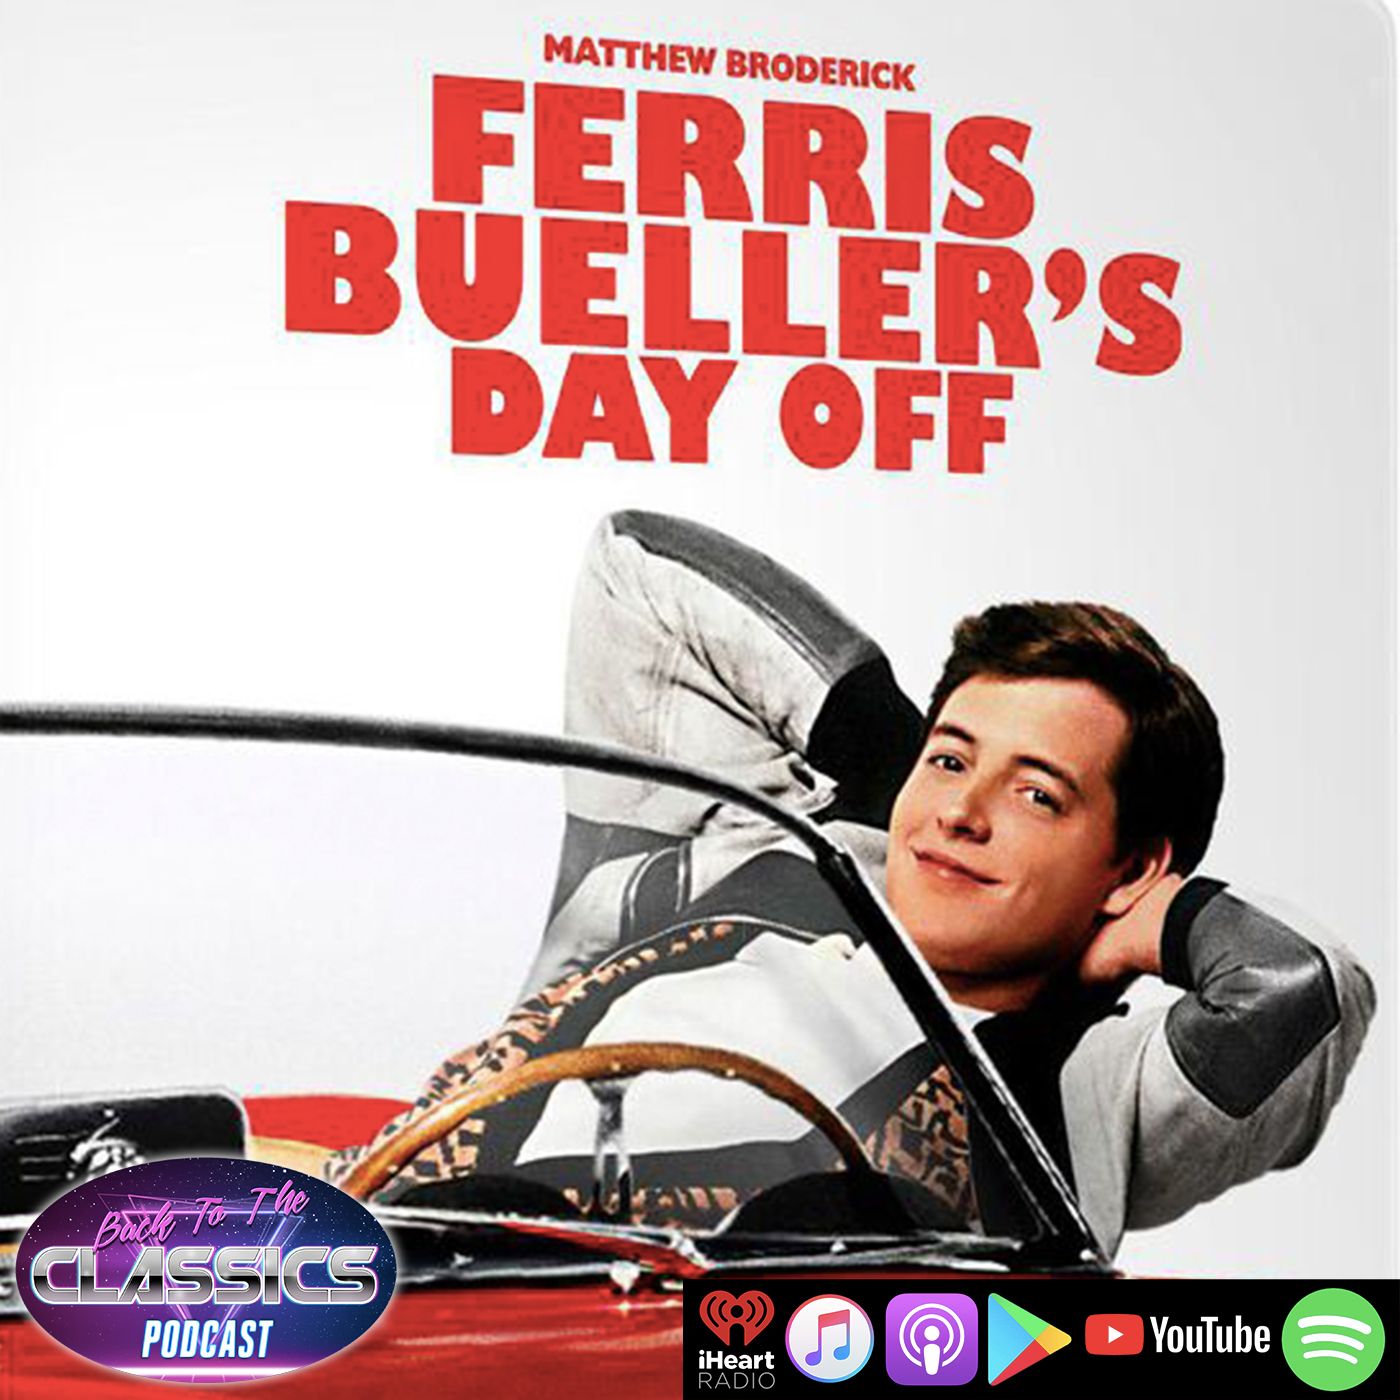 Back to Ferris Bueller's Day Off